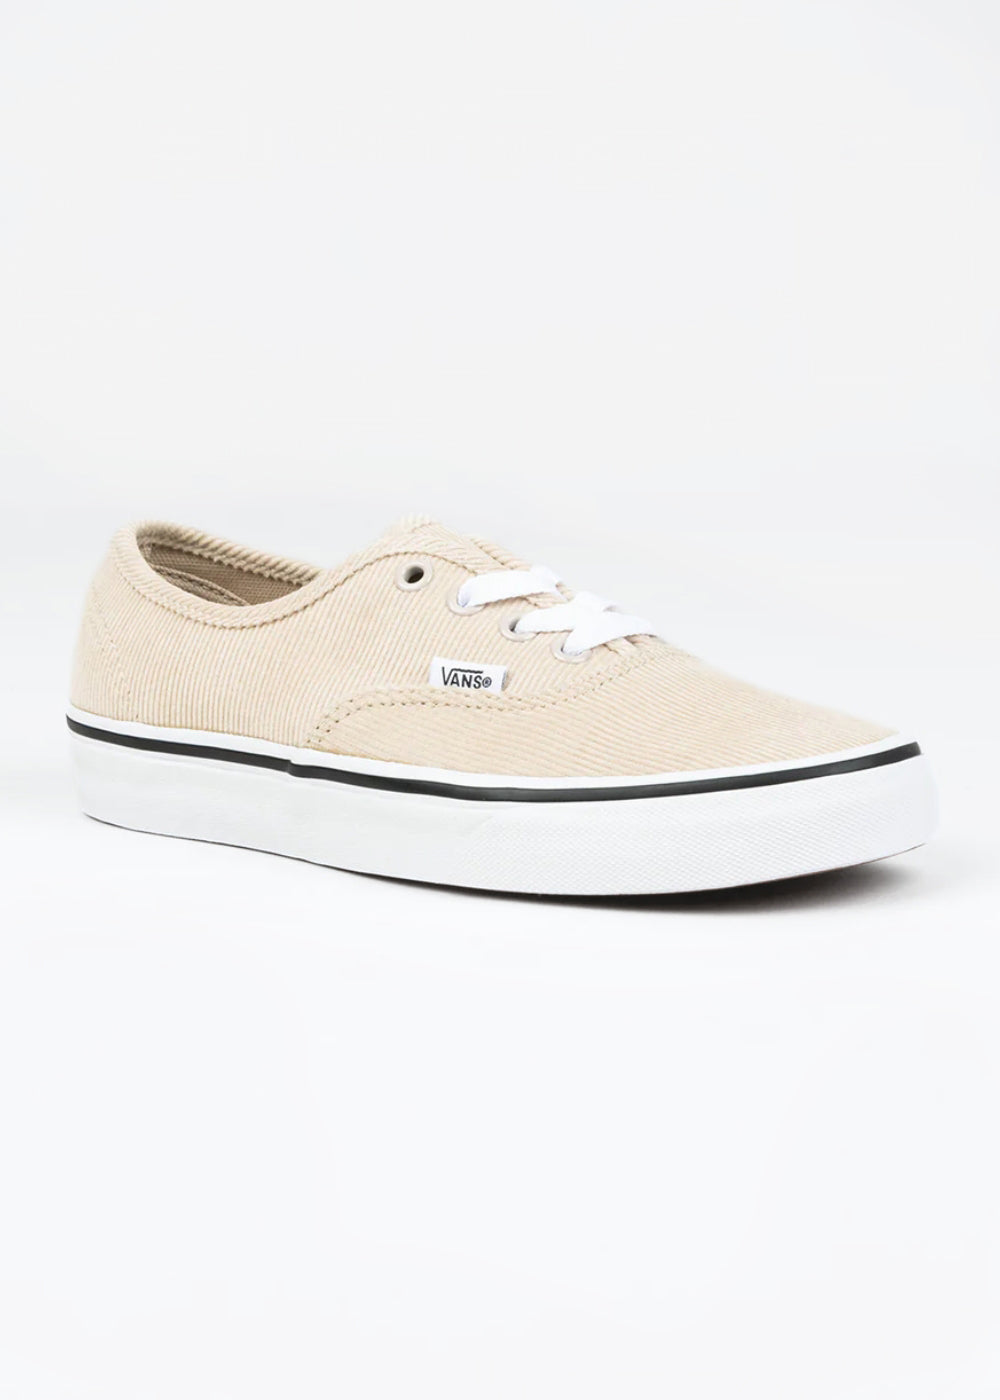 Vans Authentic Shoes in Mini Cord French Oak